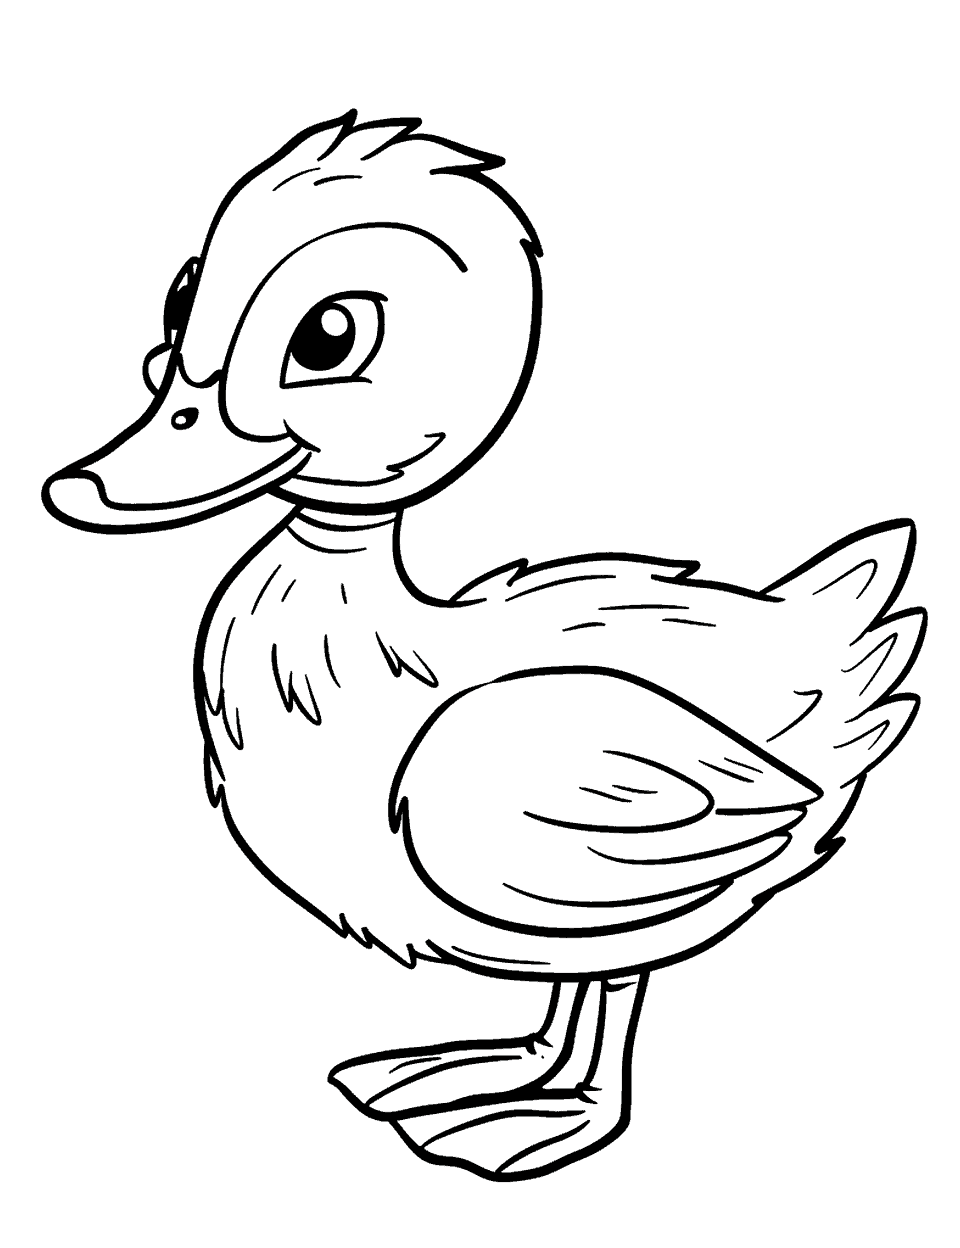 Simple Duck Outline Coloring Page - A basic outline of a duck, perfect for young children to color in.